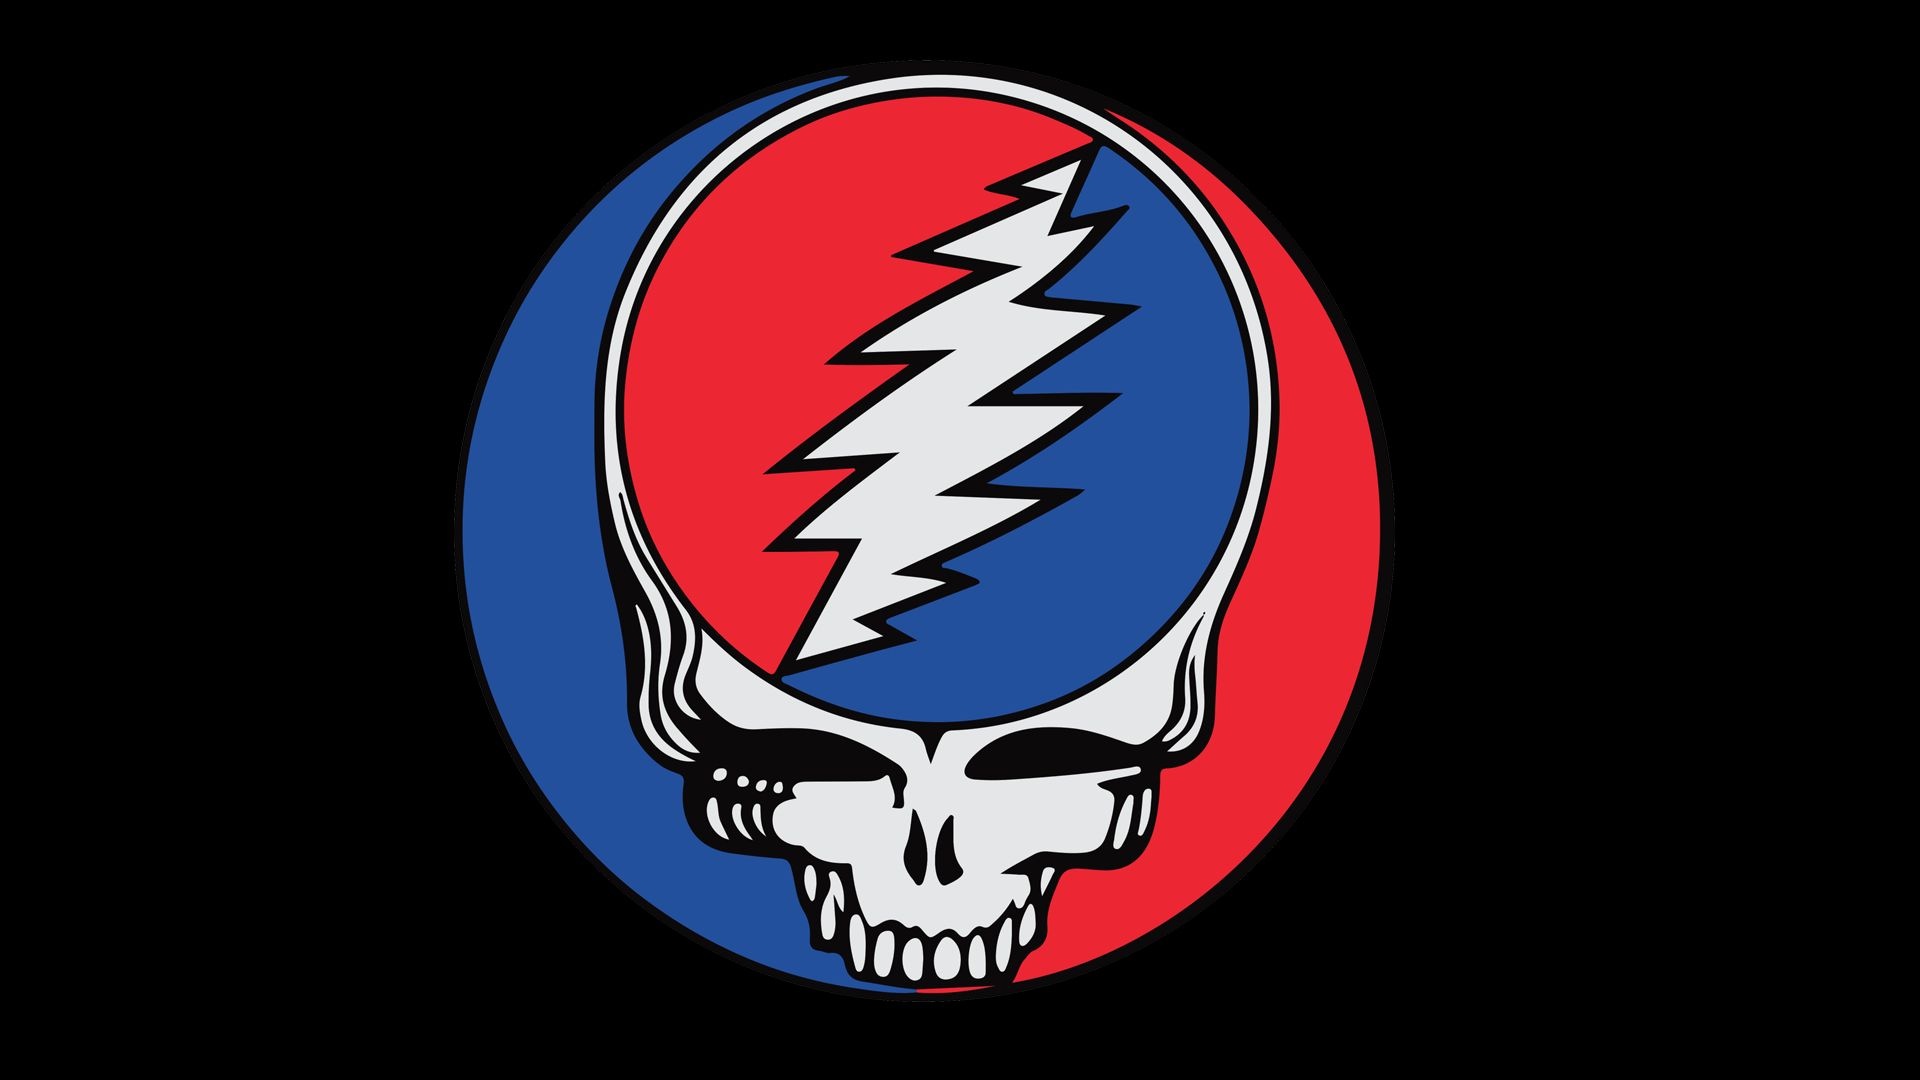 Grateful Dead: An American rock band, A variety of styles ranging from electronic and jazz to blues and folk. 1920x1080 Full HD Wallpaper.